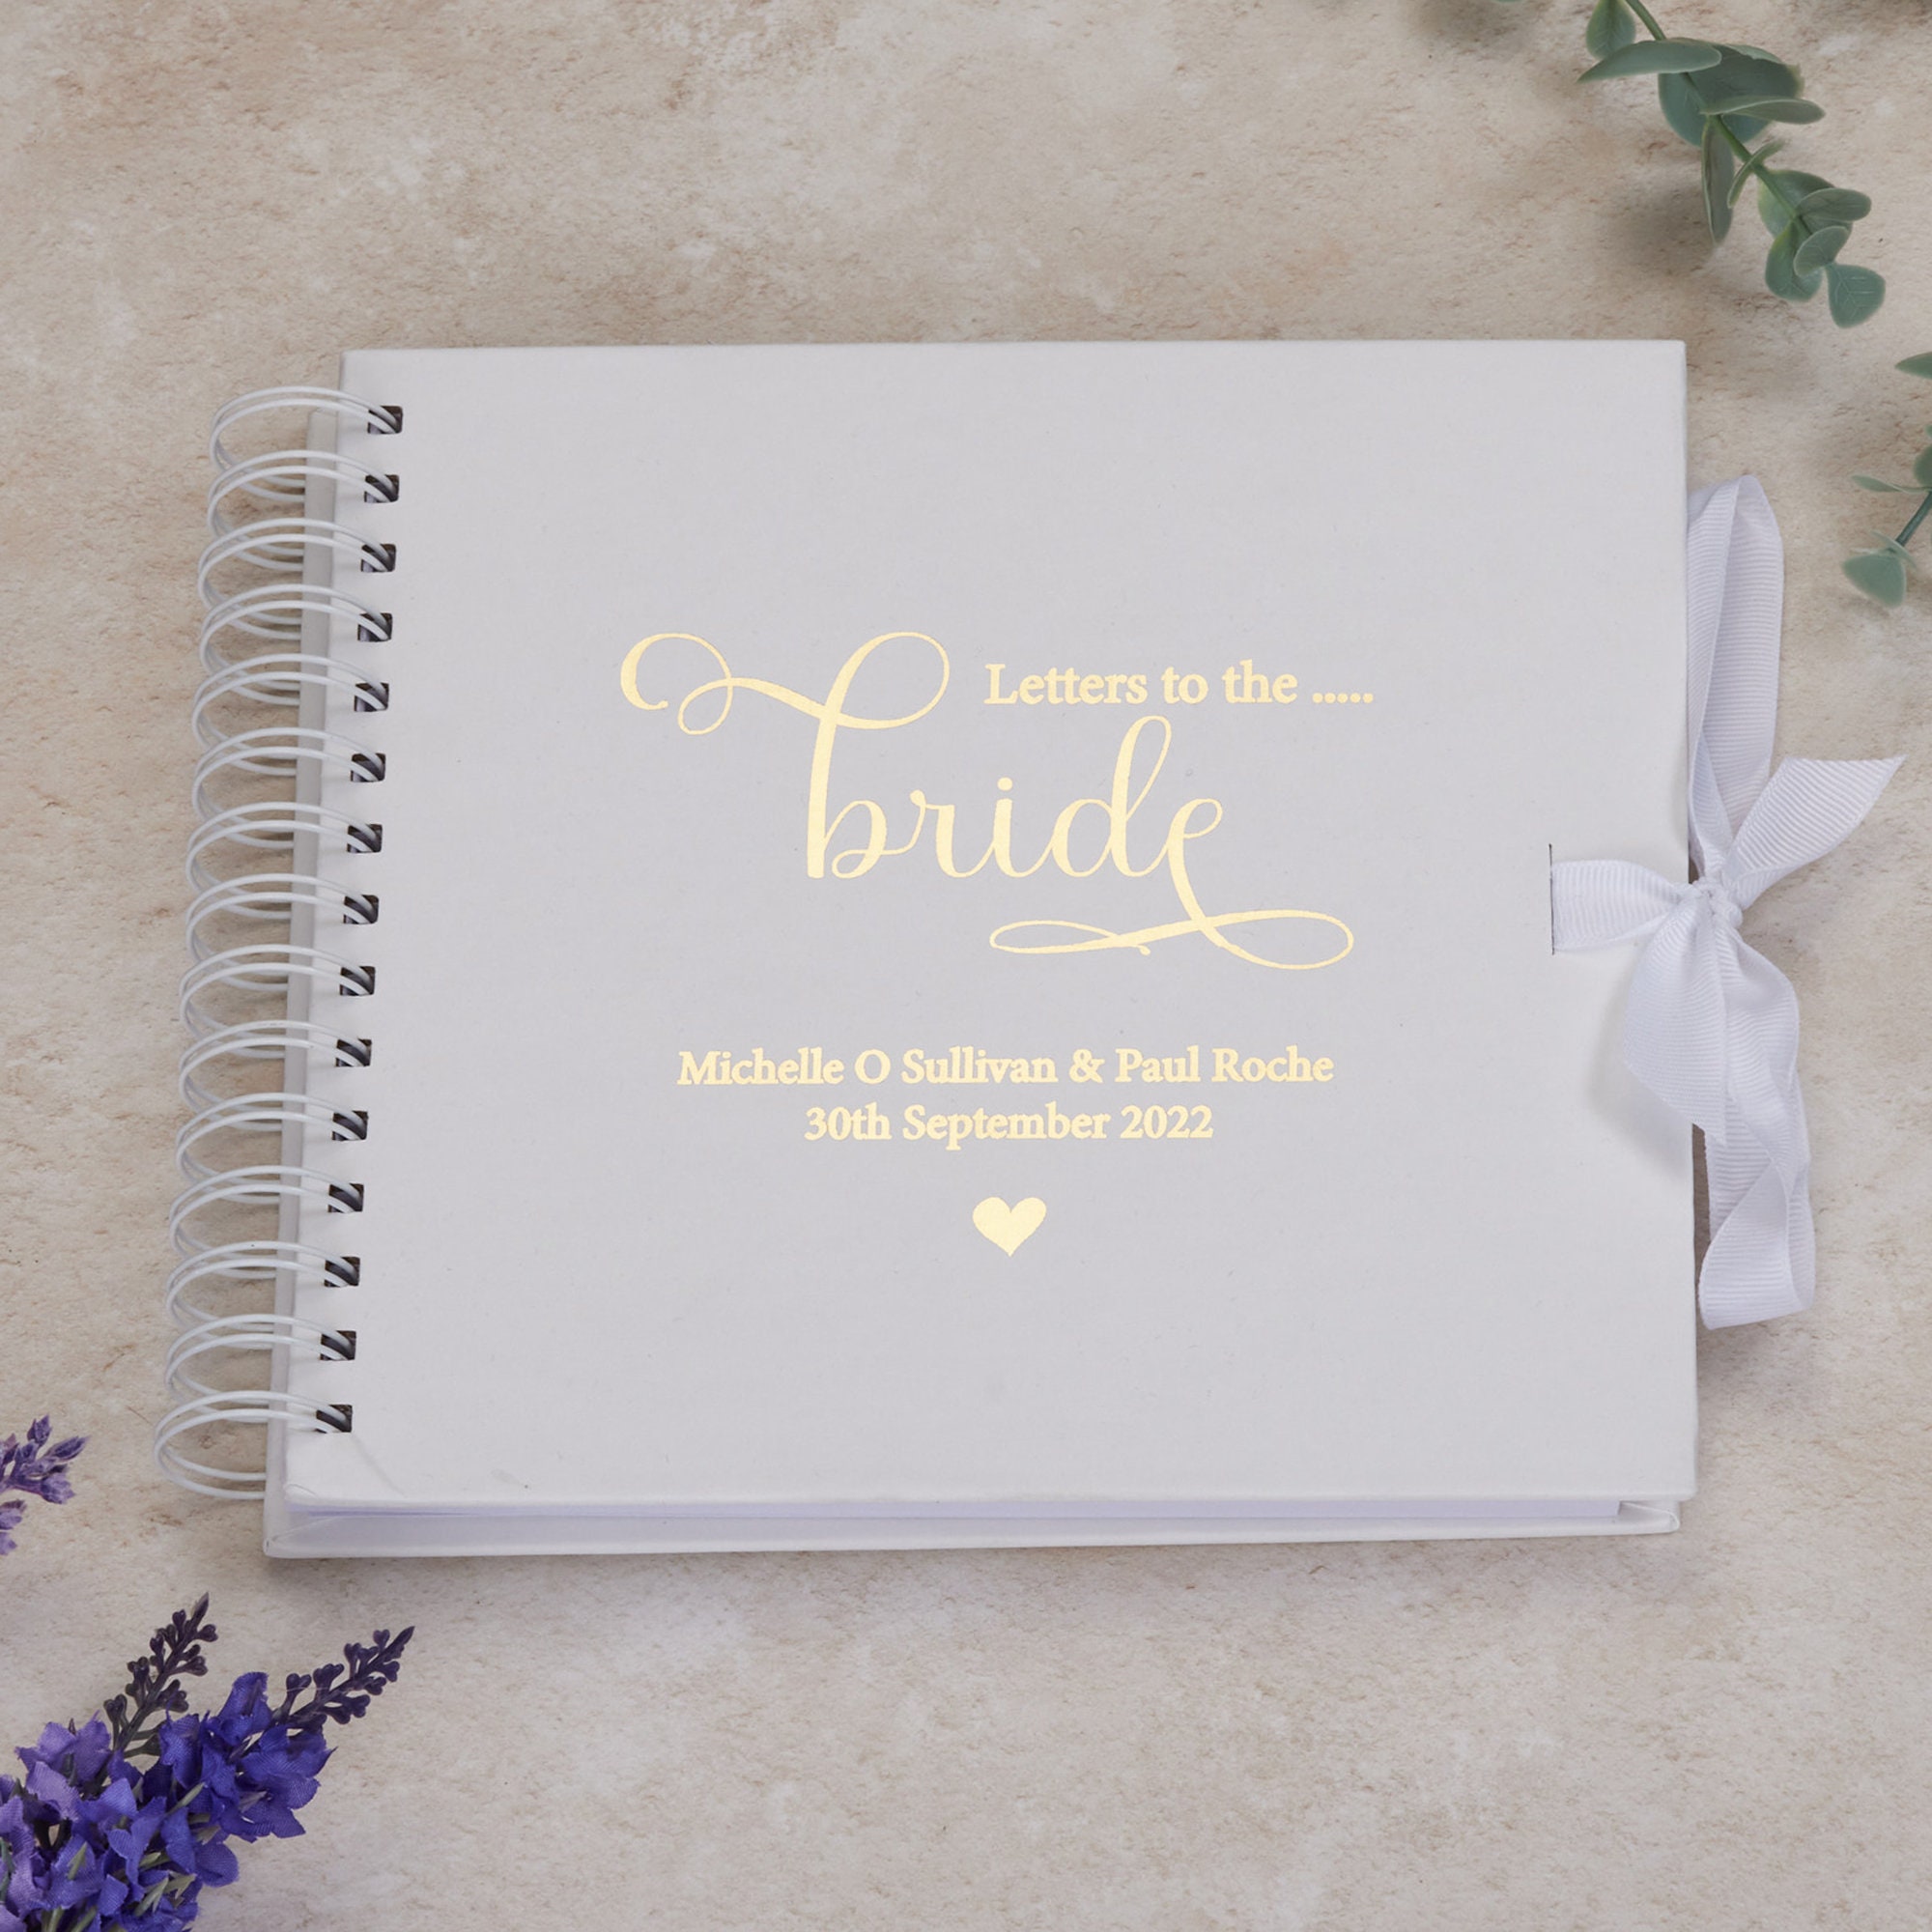 Bride To Be Scrapbook Paper: Wedding Craft Paper Pad, Miss To Mrs Gift for  Scrapbooking